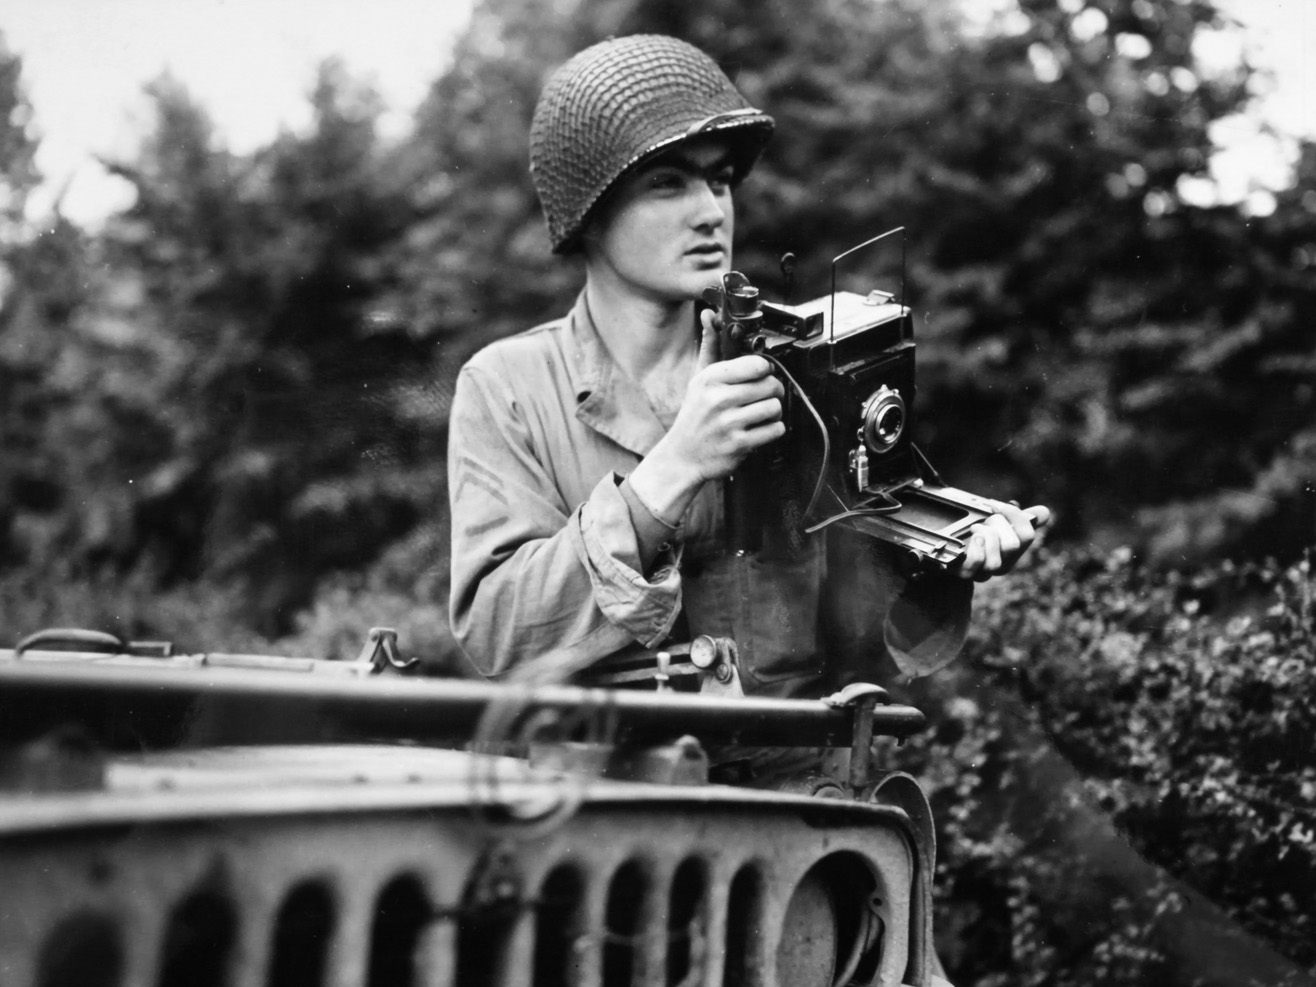 Corporal Hugh McHugh, shown with his 4x5 Speed Graphic PH-104, was killed by a sniper January 15, 1945 in Belgium.